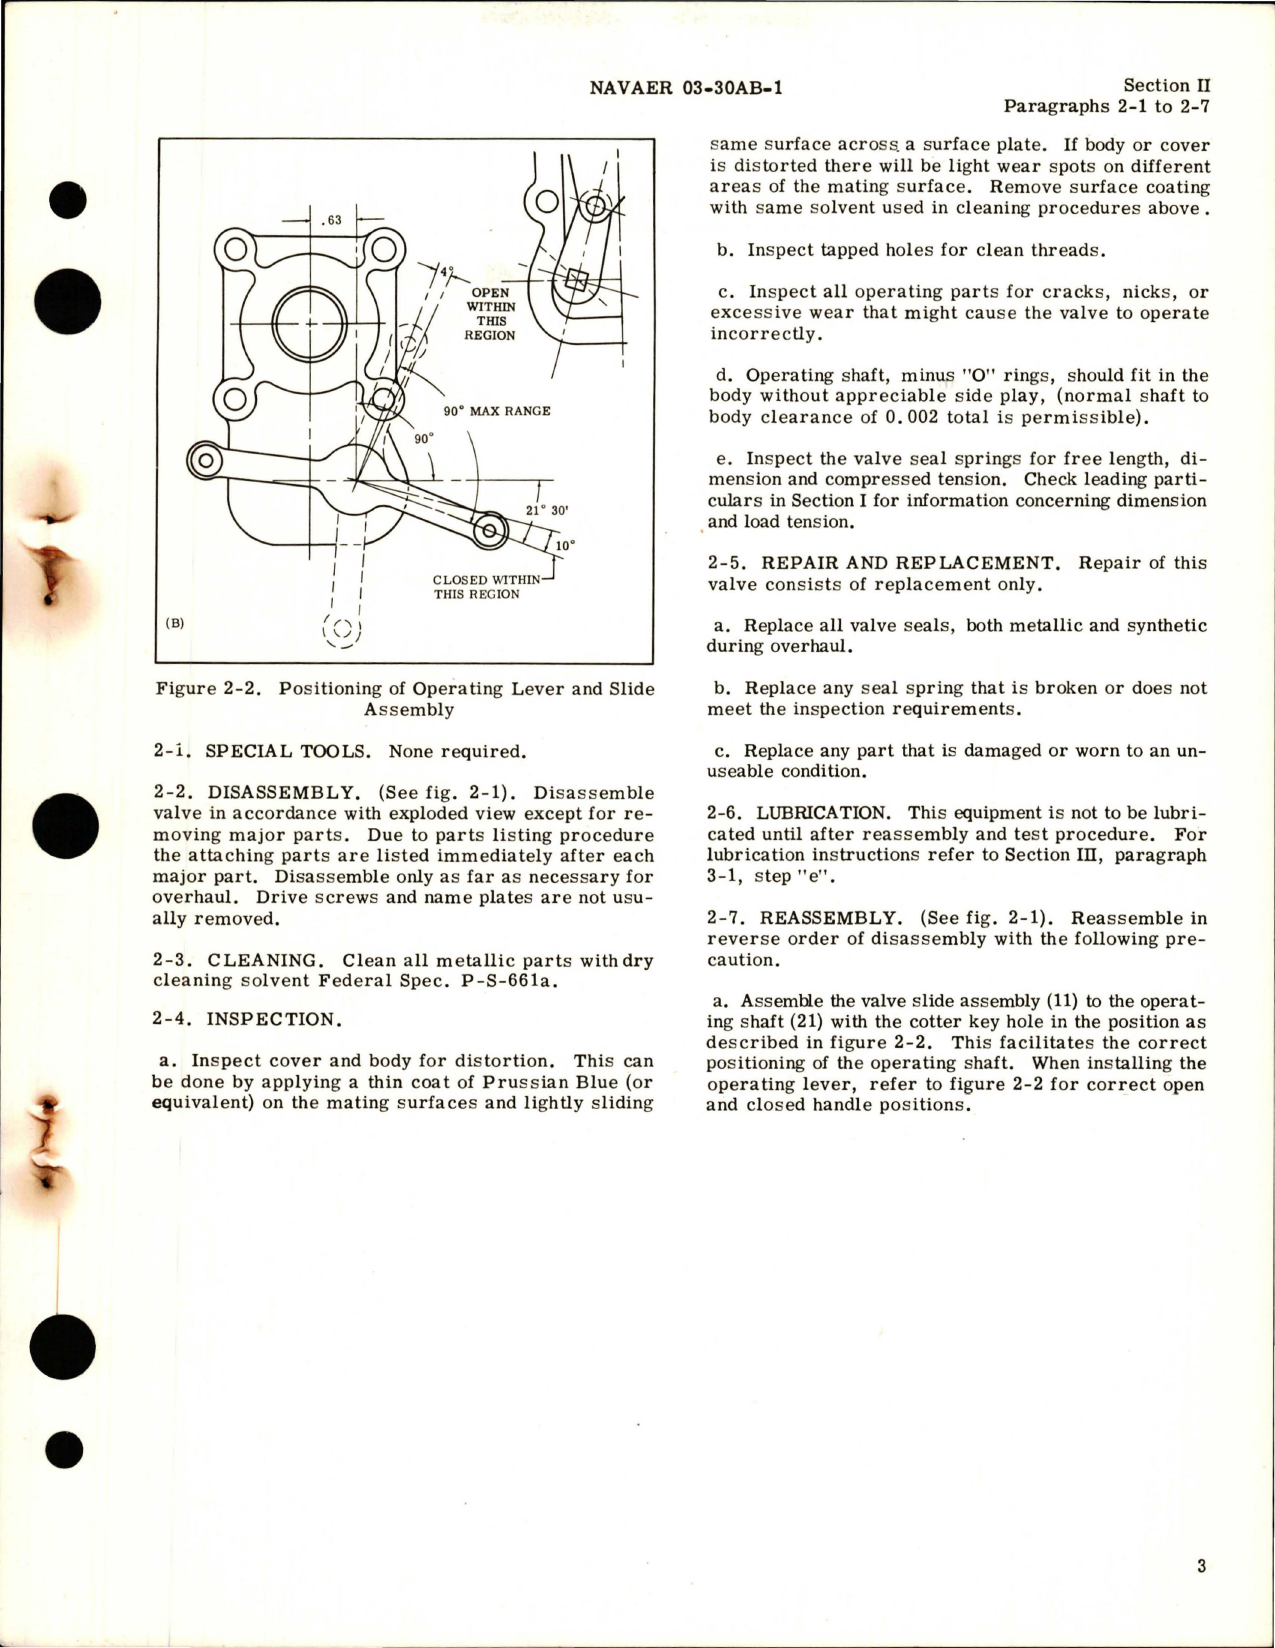 Sample page 5 from AirCorps Library document: Overhaul Instructions for Manual Slide Valve Assemblies 